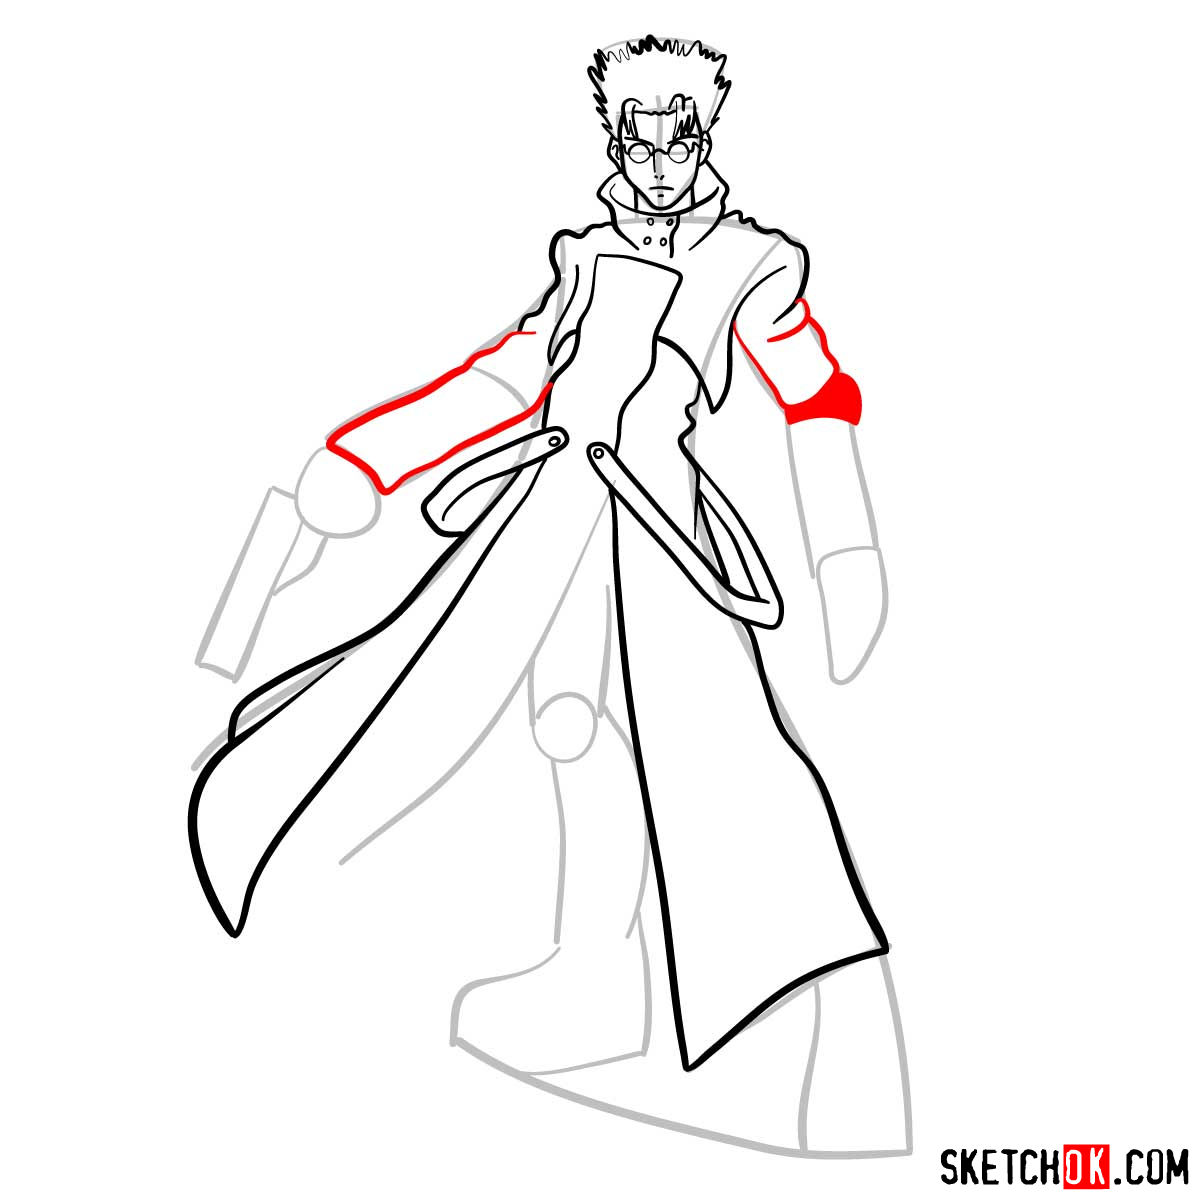 How to draw Vash the Stampede from Trigun anime - step 09